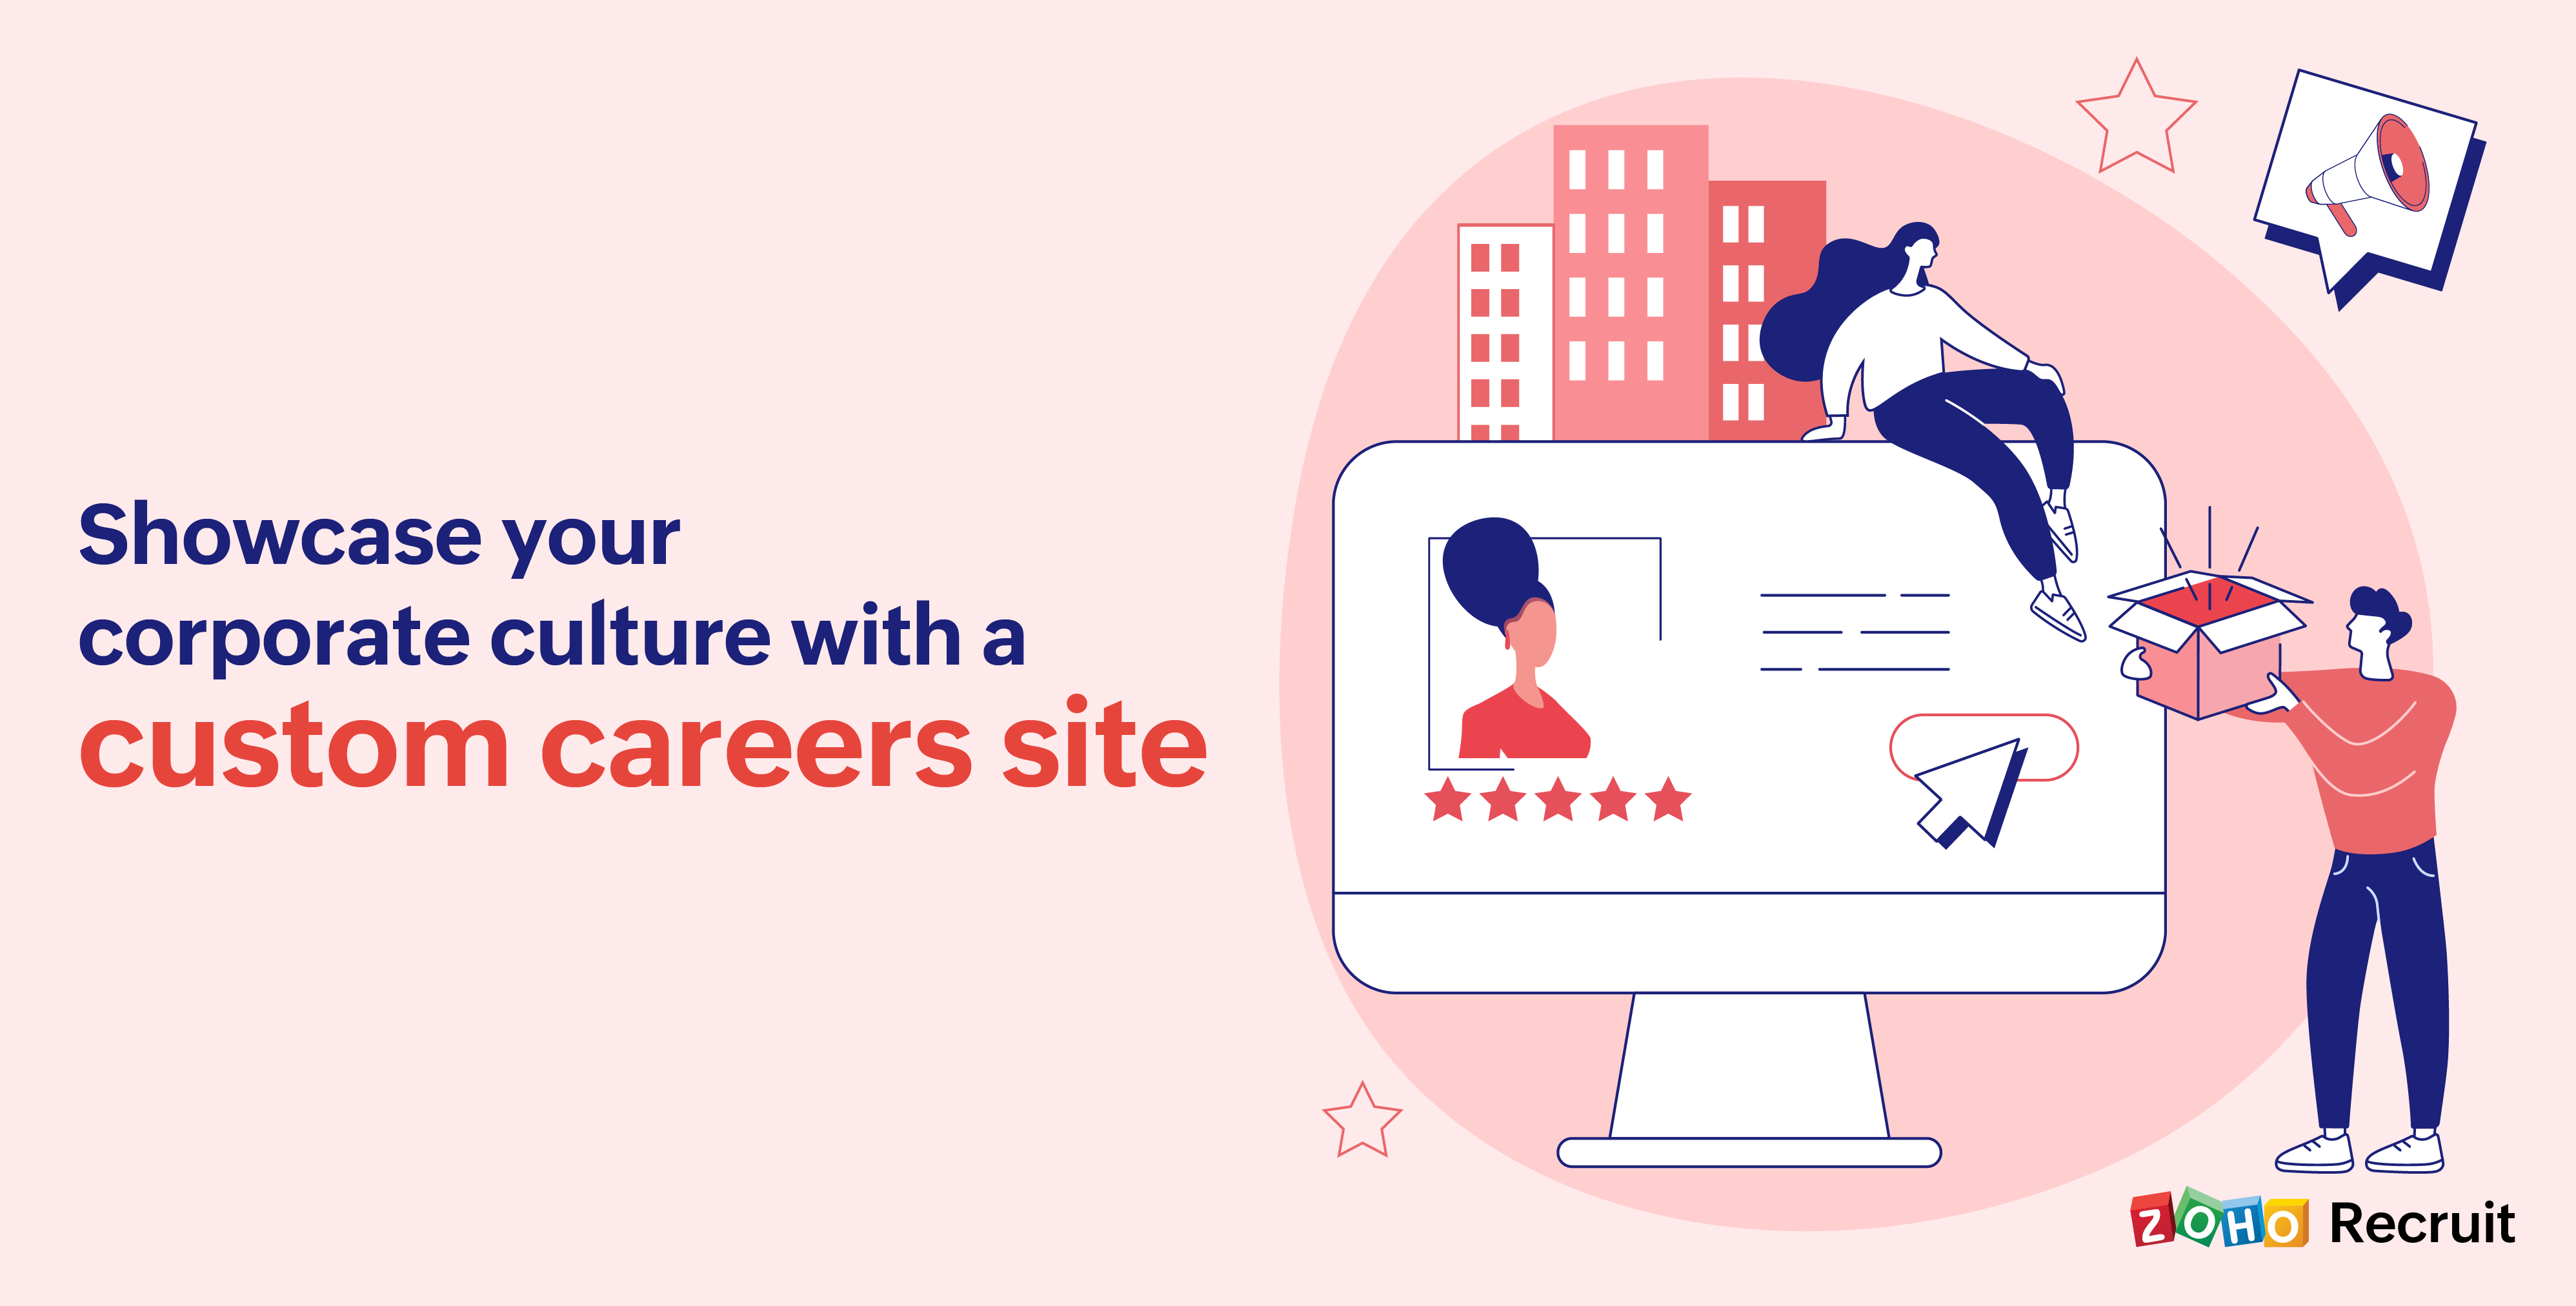 Showcase your corporate culture with a custom careers site